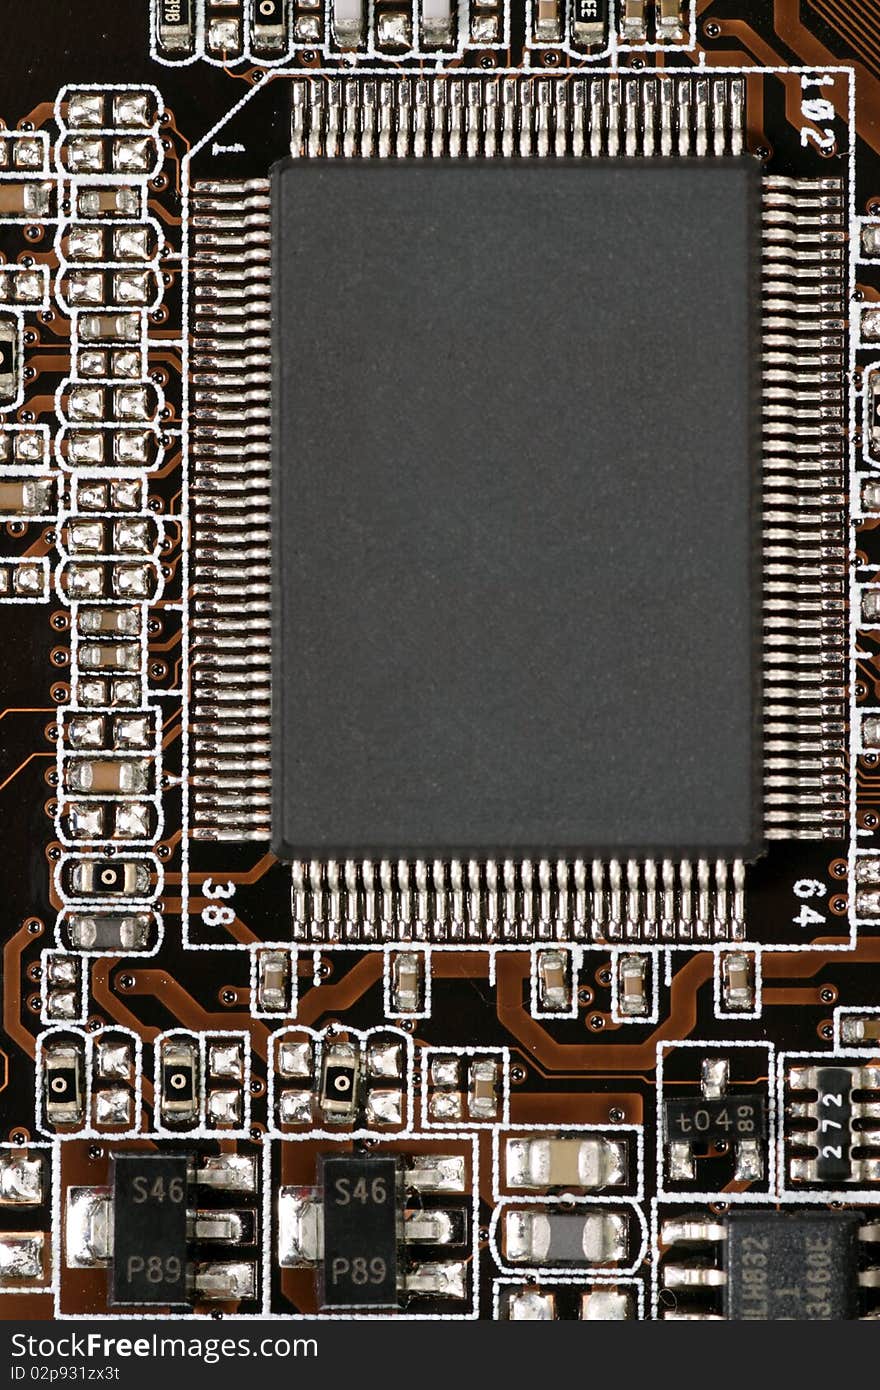 Circuit board with a computer chip